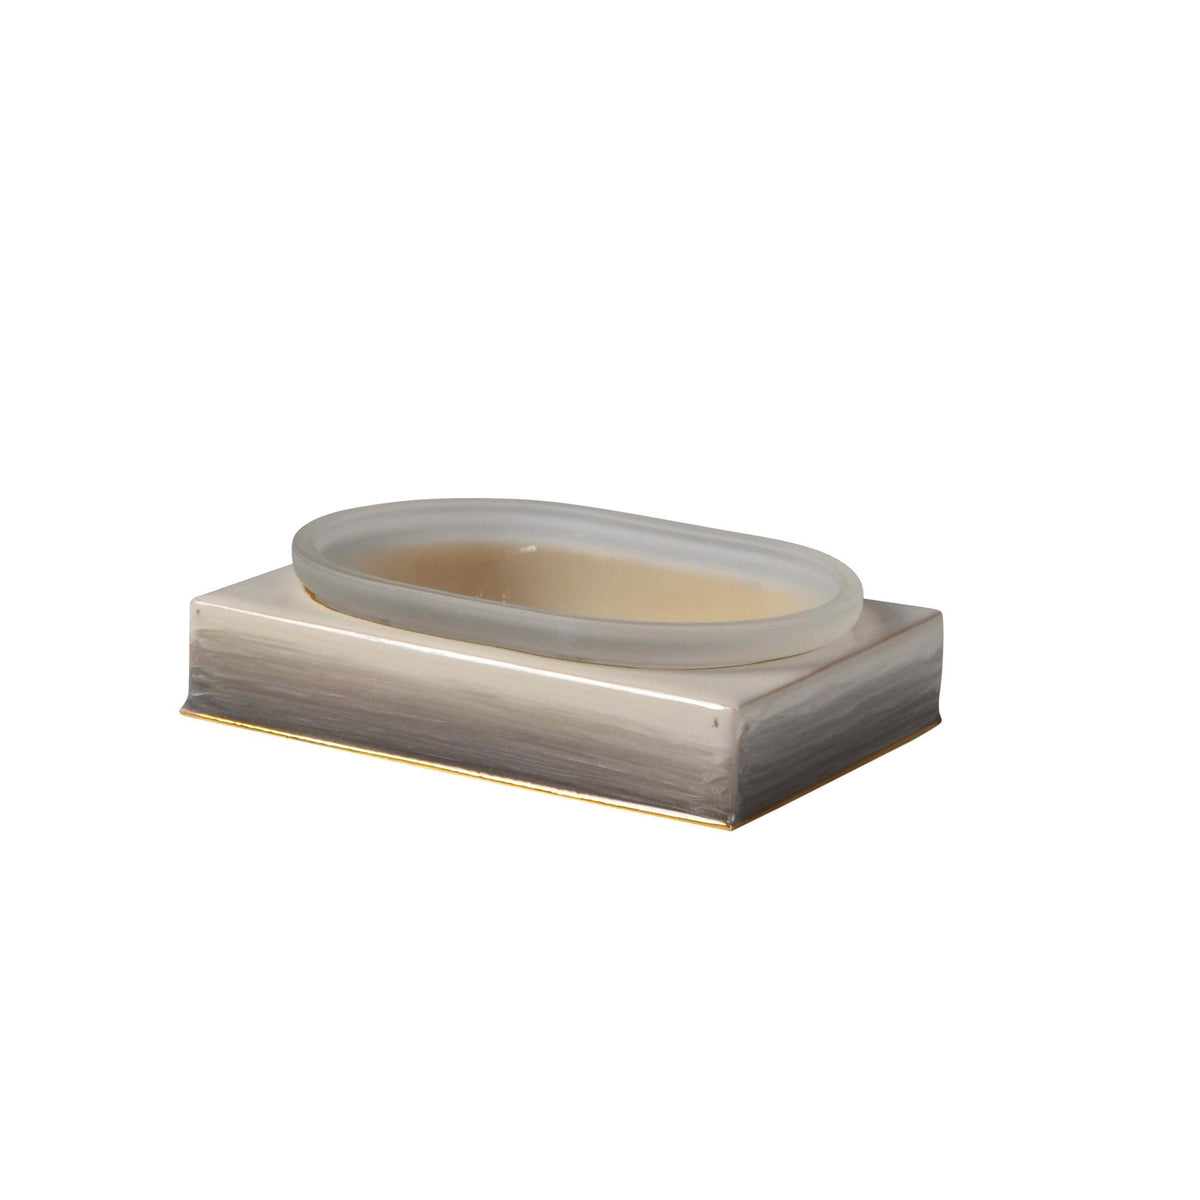 Mike + Ally - Ombre Soap Dish - 58031N - beige - 